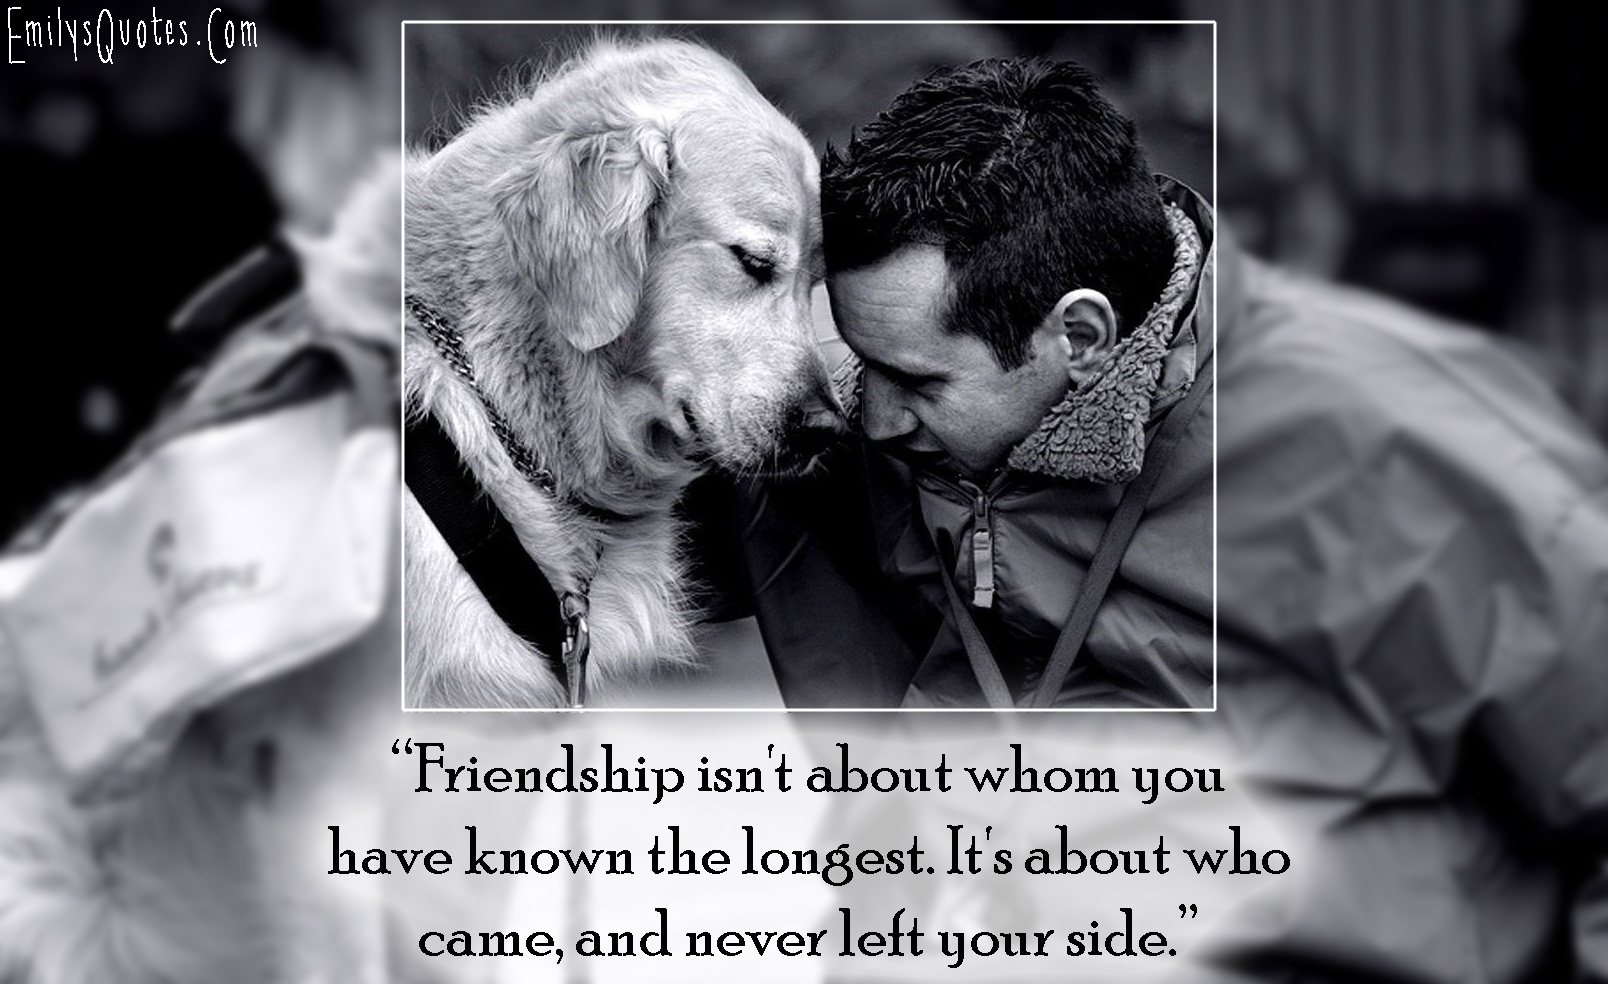 Friendship isn’t about whom you have known the longest. It’s about who ...